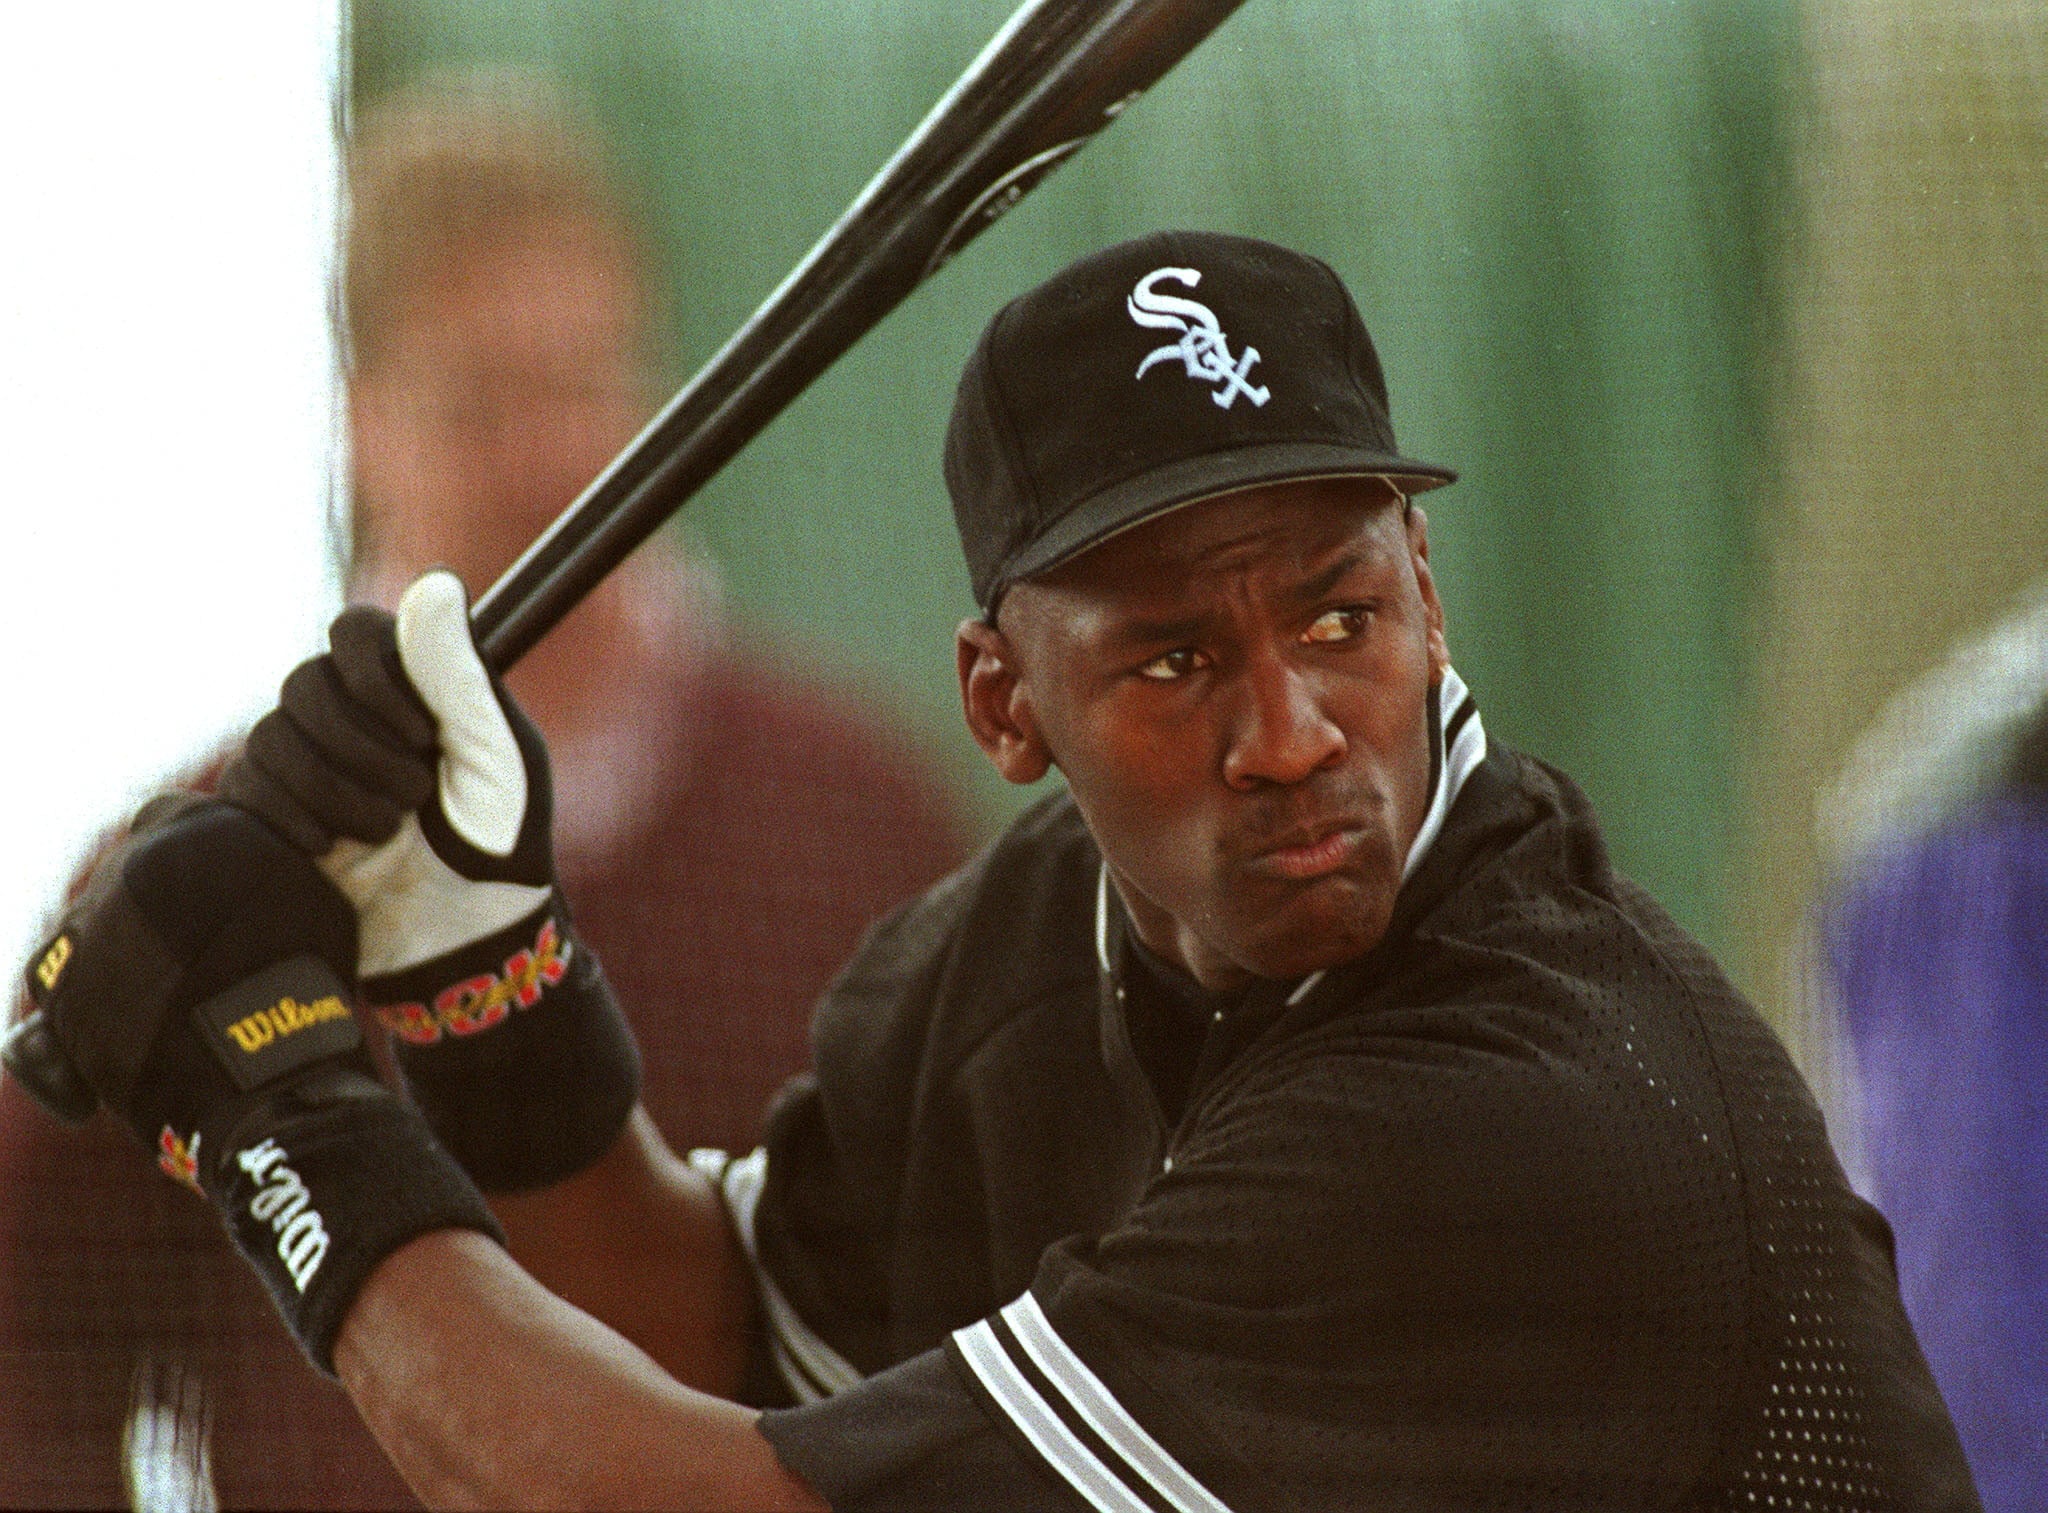 CHICAGO, IL - FEBRUARY 7:  American basketball star Michael Jordan takes batting practice 07 February 1994 with the Chicago White Sox in a bid to play with their baseball team.  (Photo credit should read EUGENE GARCIA/AFP via Getty Images)